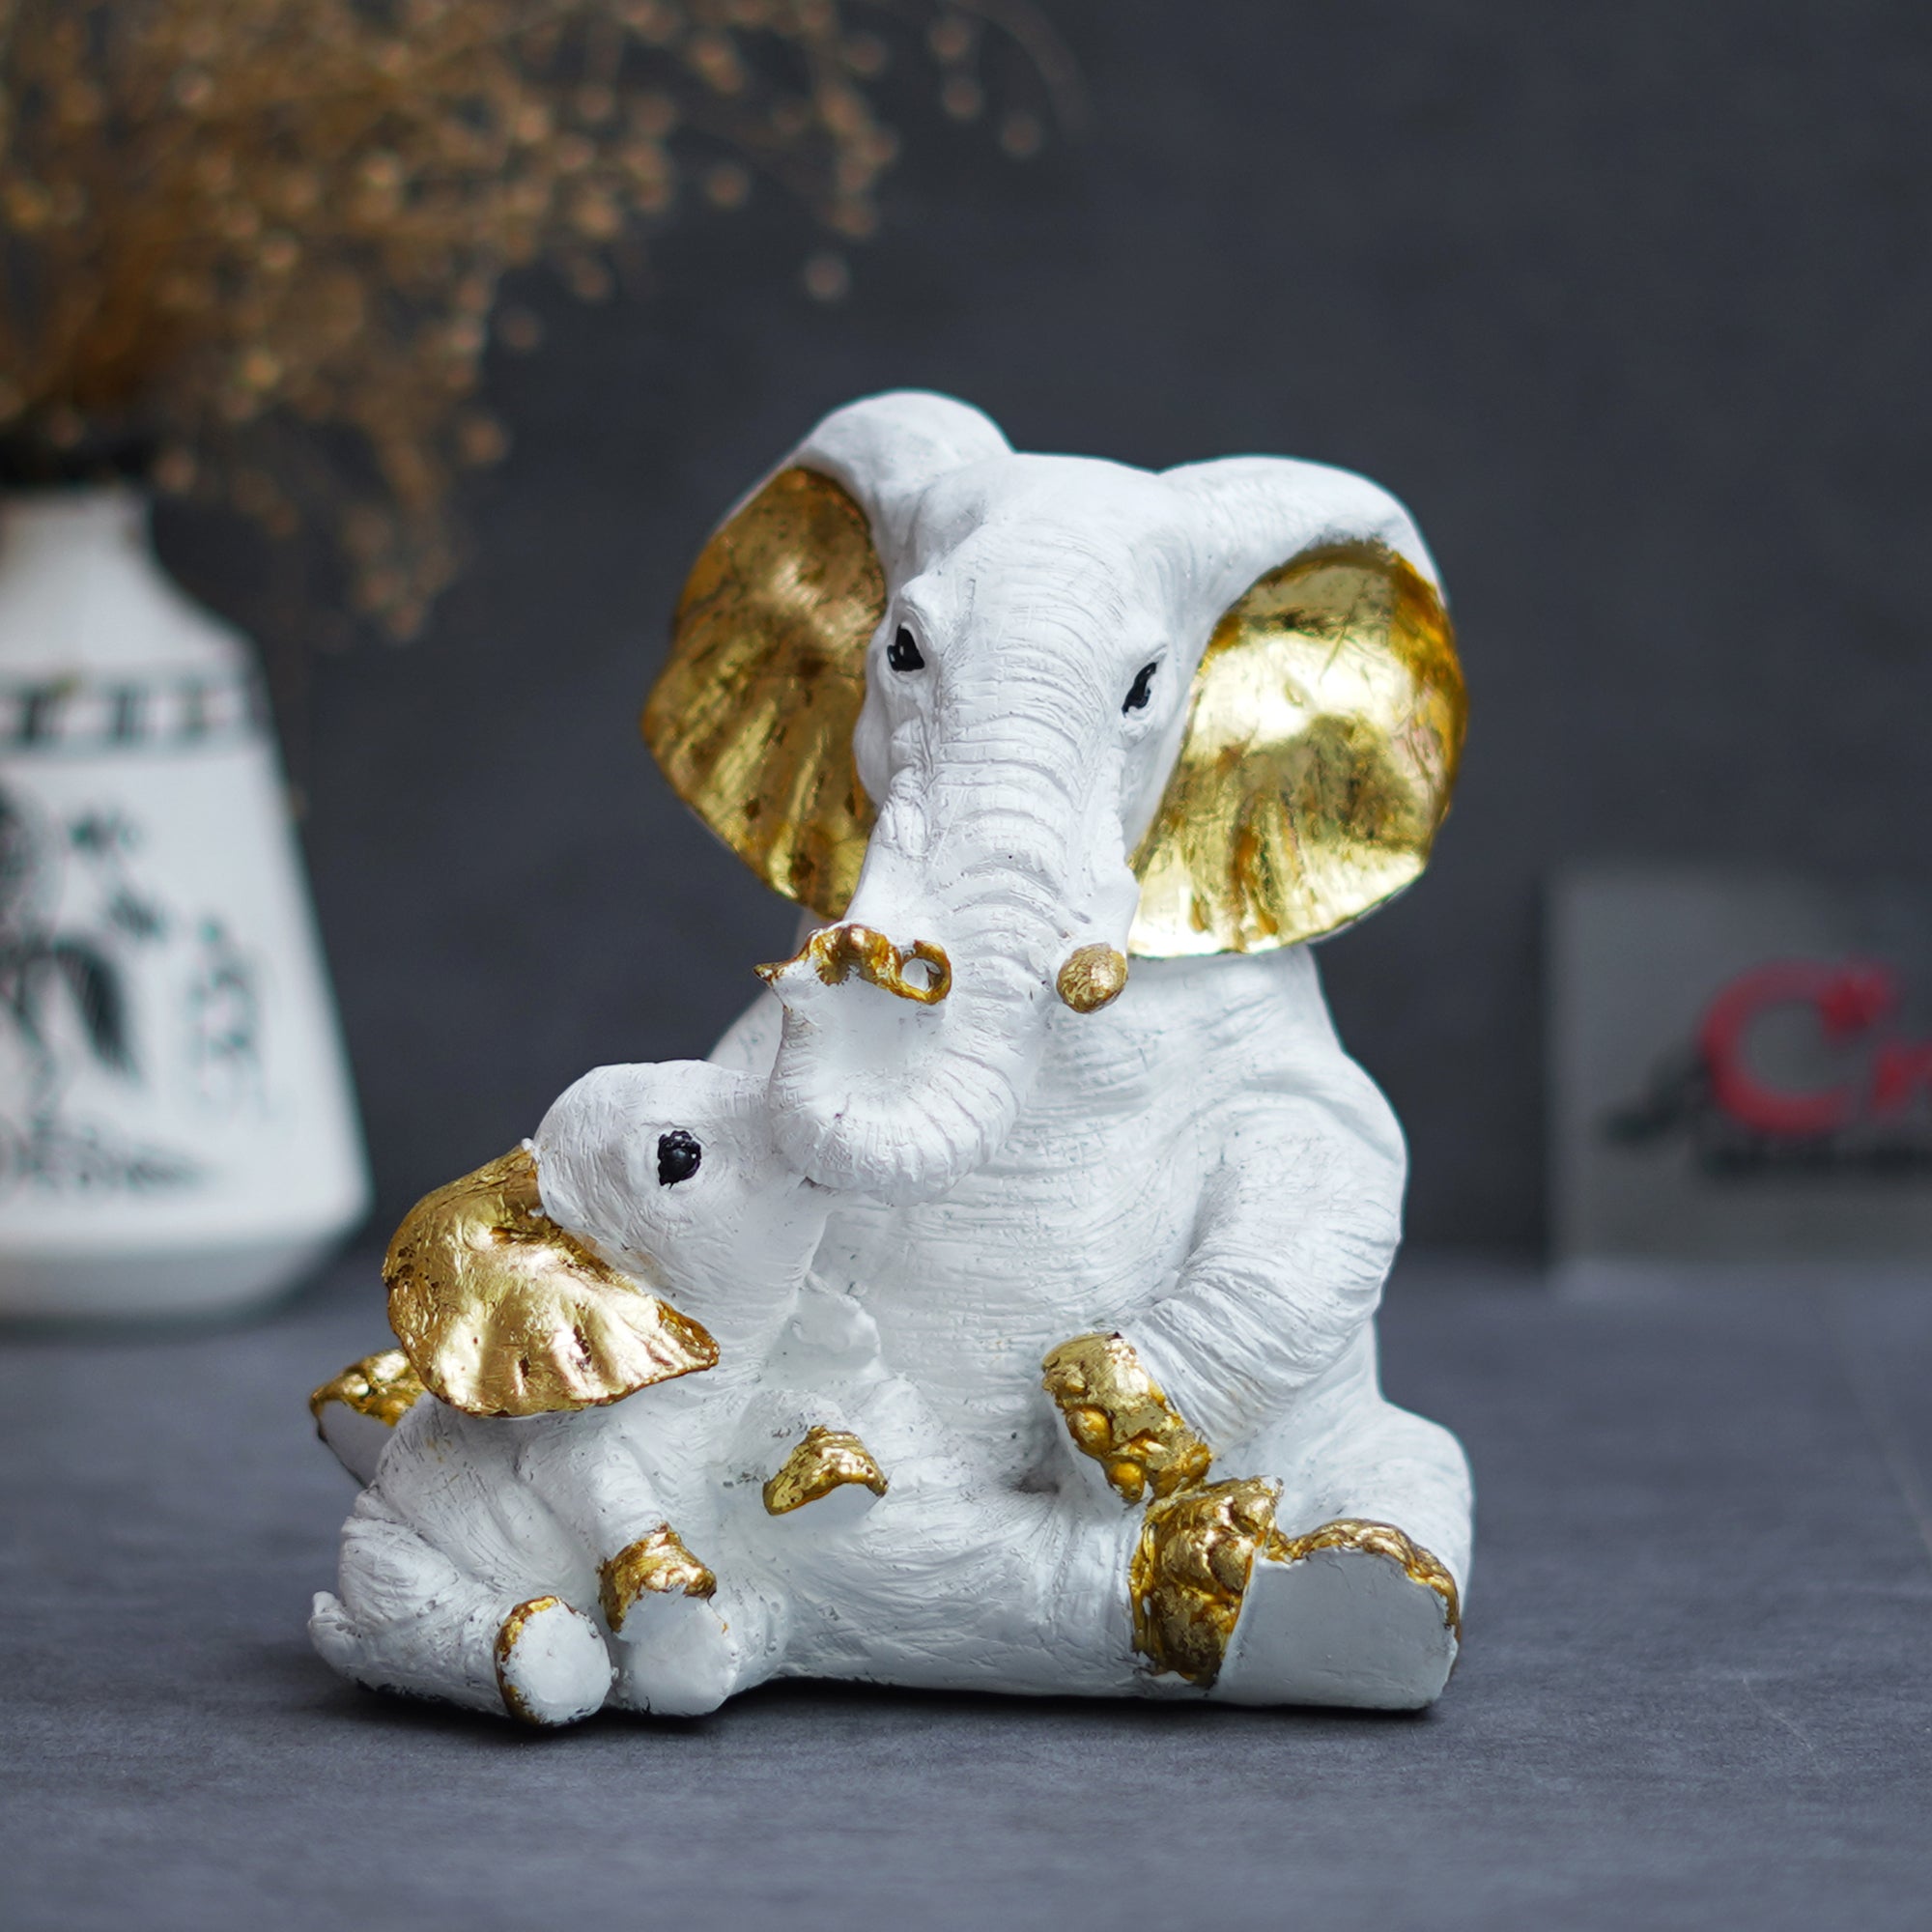 White Polyresin Small Elephant Family Mom and Baby Statue Animal Figurines Decorative Showpiece for Home Decor 1